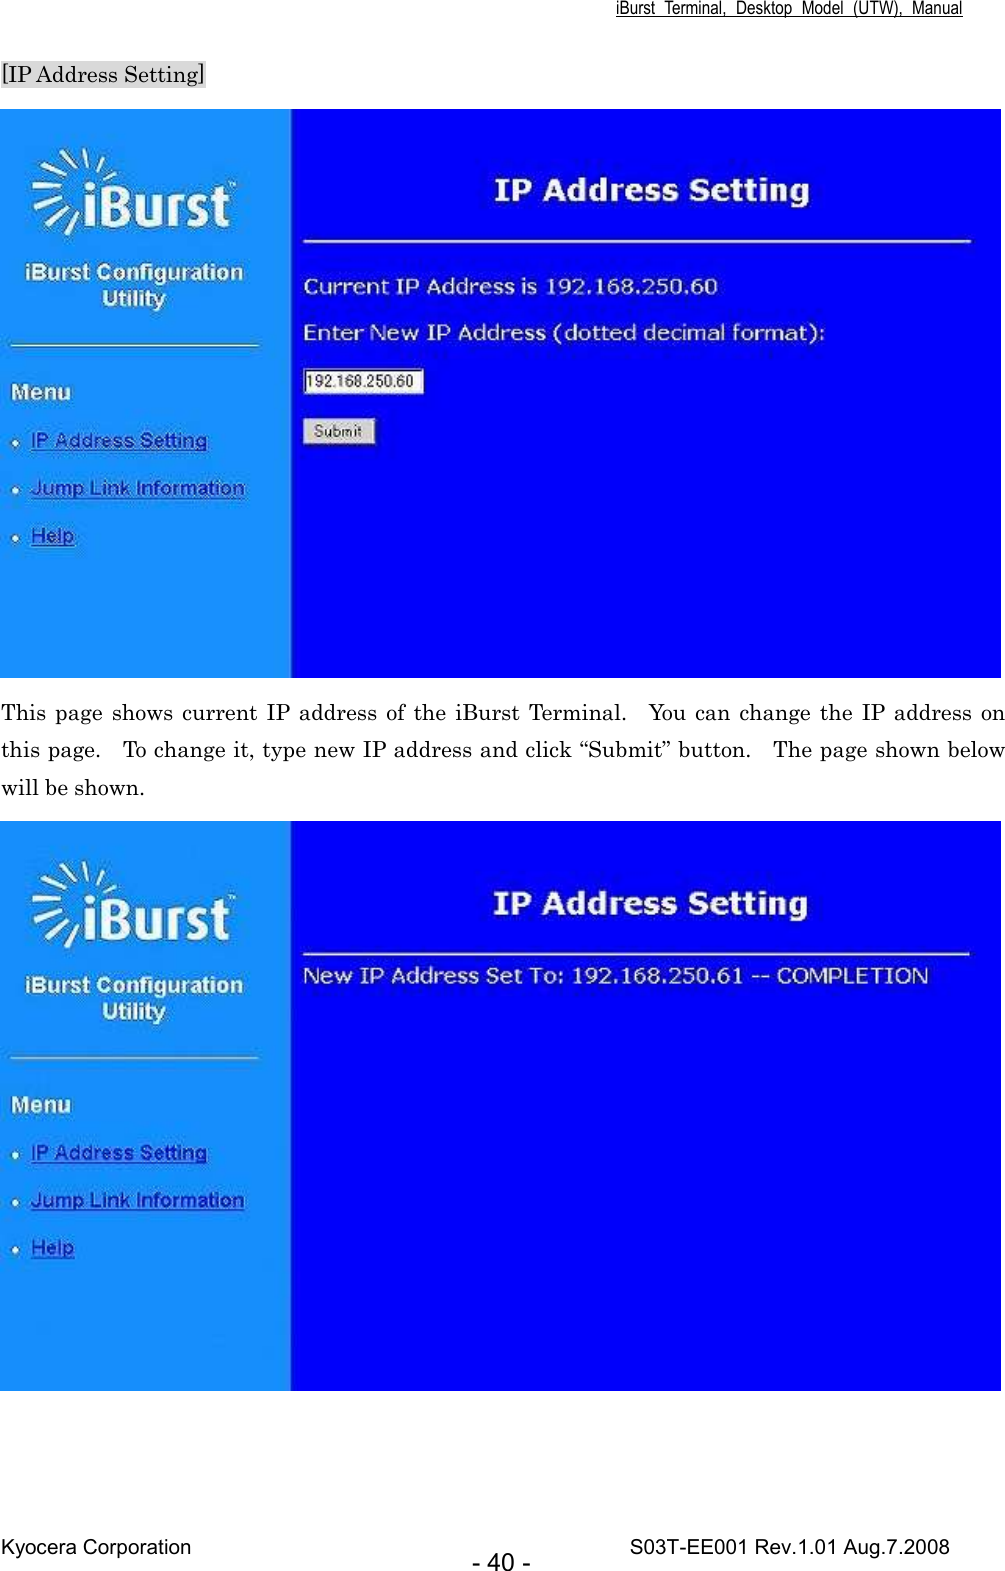 iBurst  Terminal,  Desktop  Model  (UTW),  Manual Kyocera Corporation                                                                                    S03T-EE001 Rev.1.01 Aug.7.2008 - 40 - [IP Address Setting]  This page shows current IP address  of  the  iBurst Terminal.    You can change the  IP address  on this page.    To change it, type new IP address and click “Submit” button.    The page shown below will be shown.   